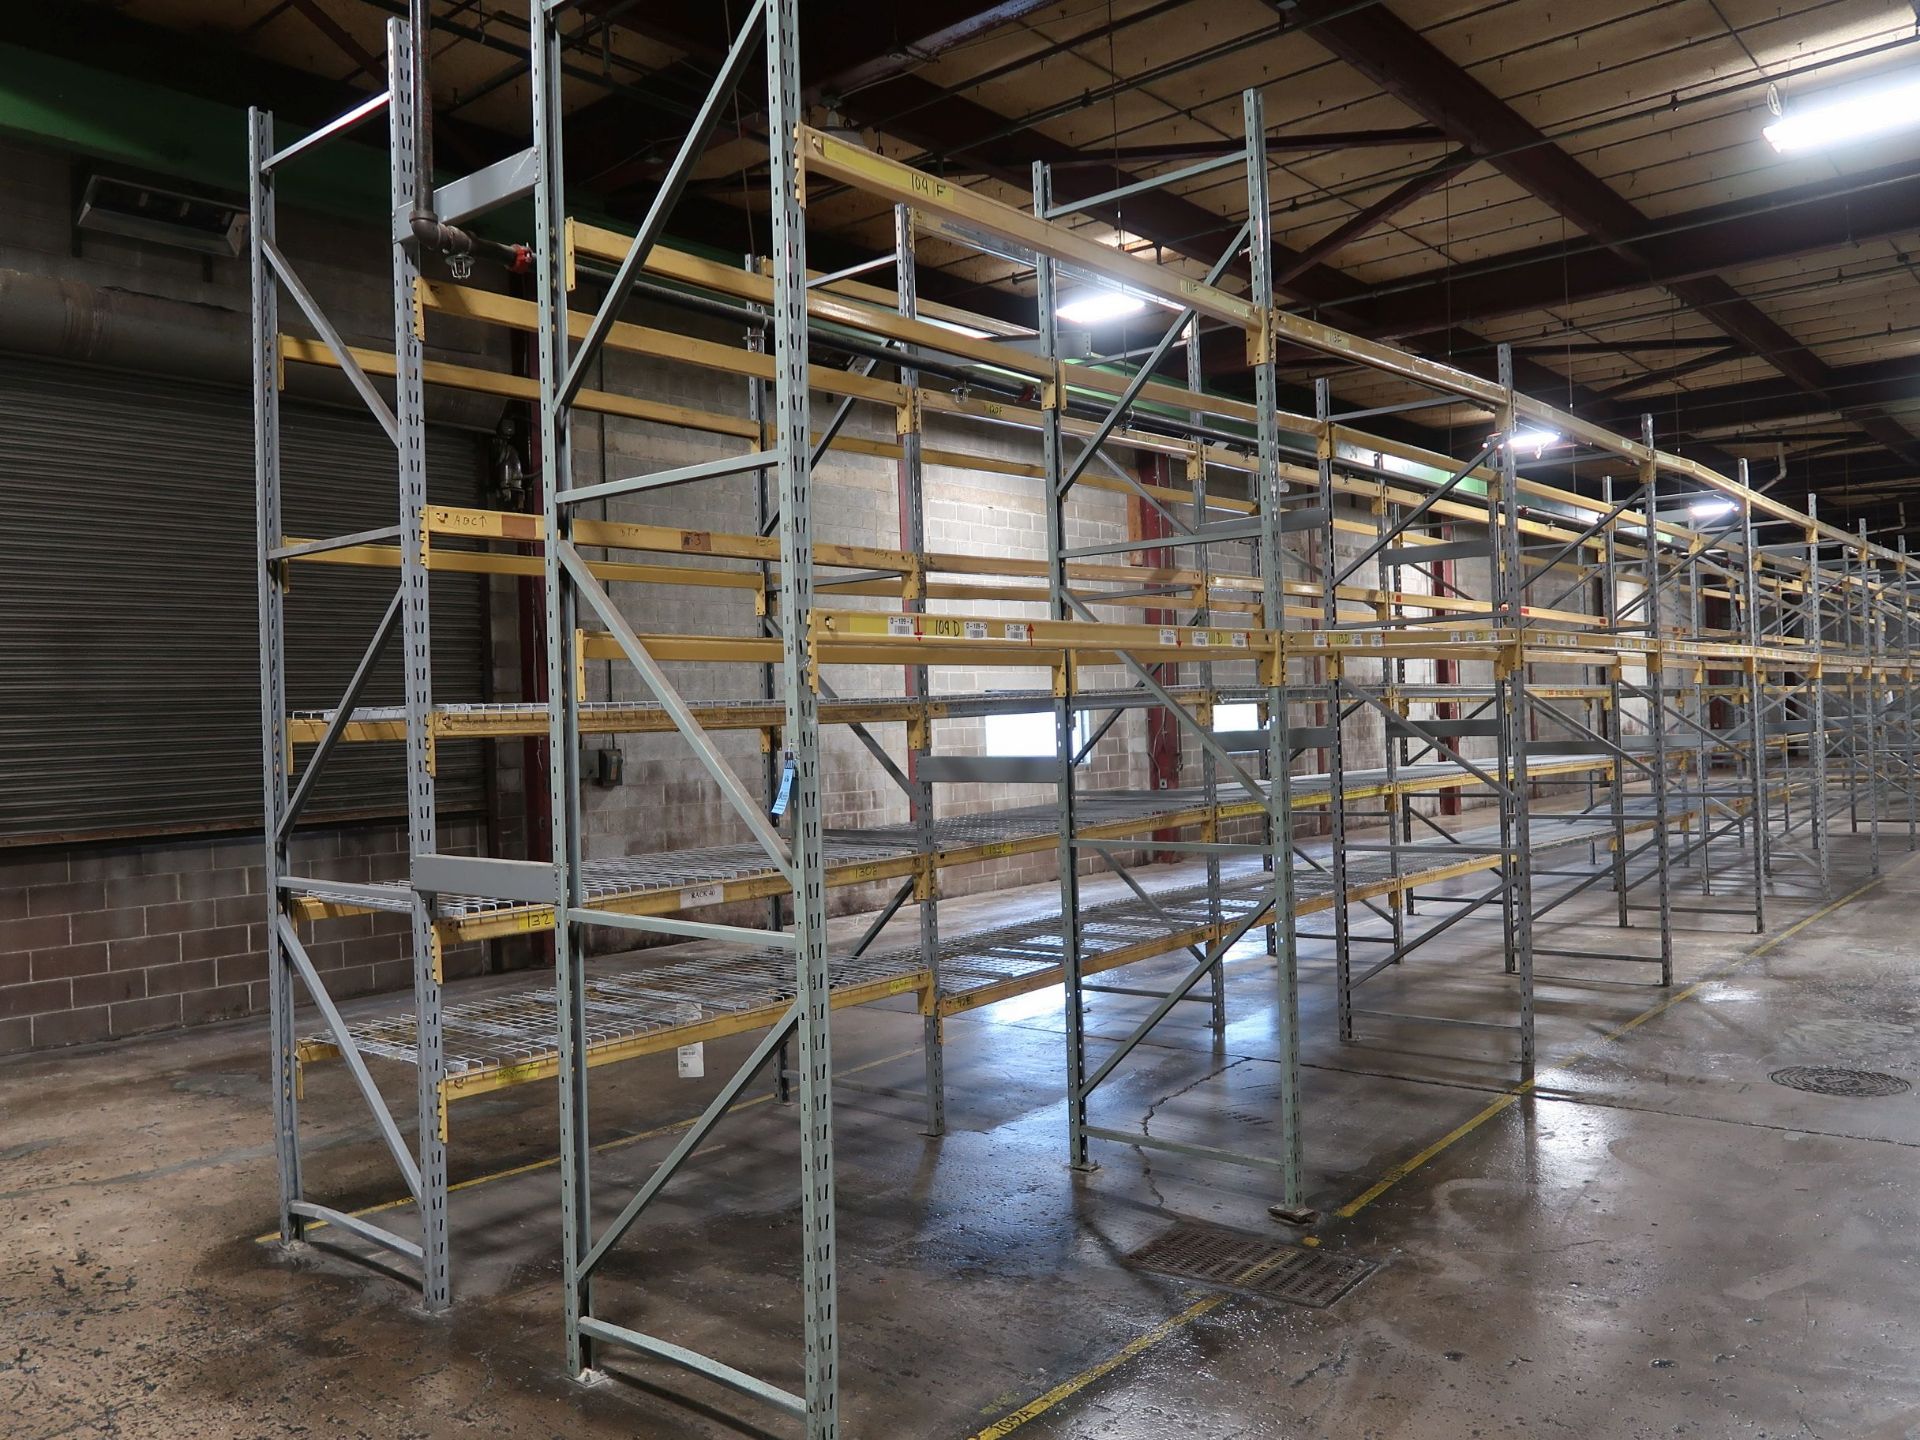 SECTIONS - (24) SECTIONS 96" X 42" X 144" & (4) SECTIONS 96" X 42" X 168" ADJUSTABLE BEAM PALLET